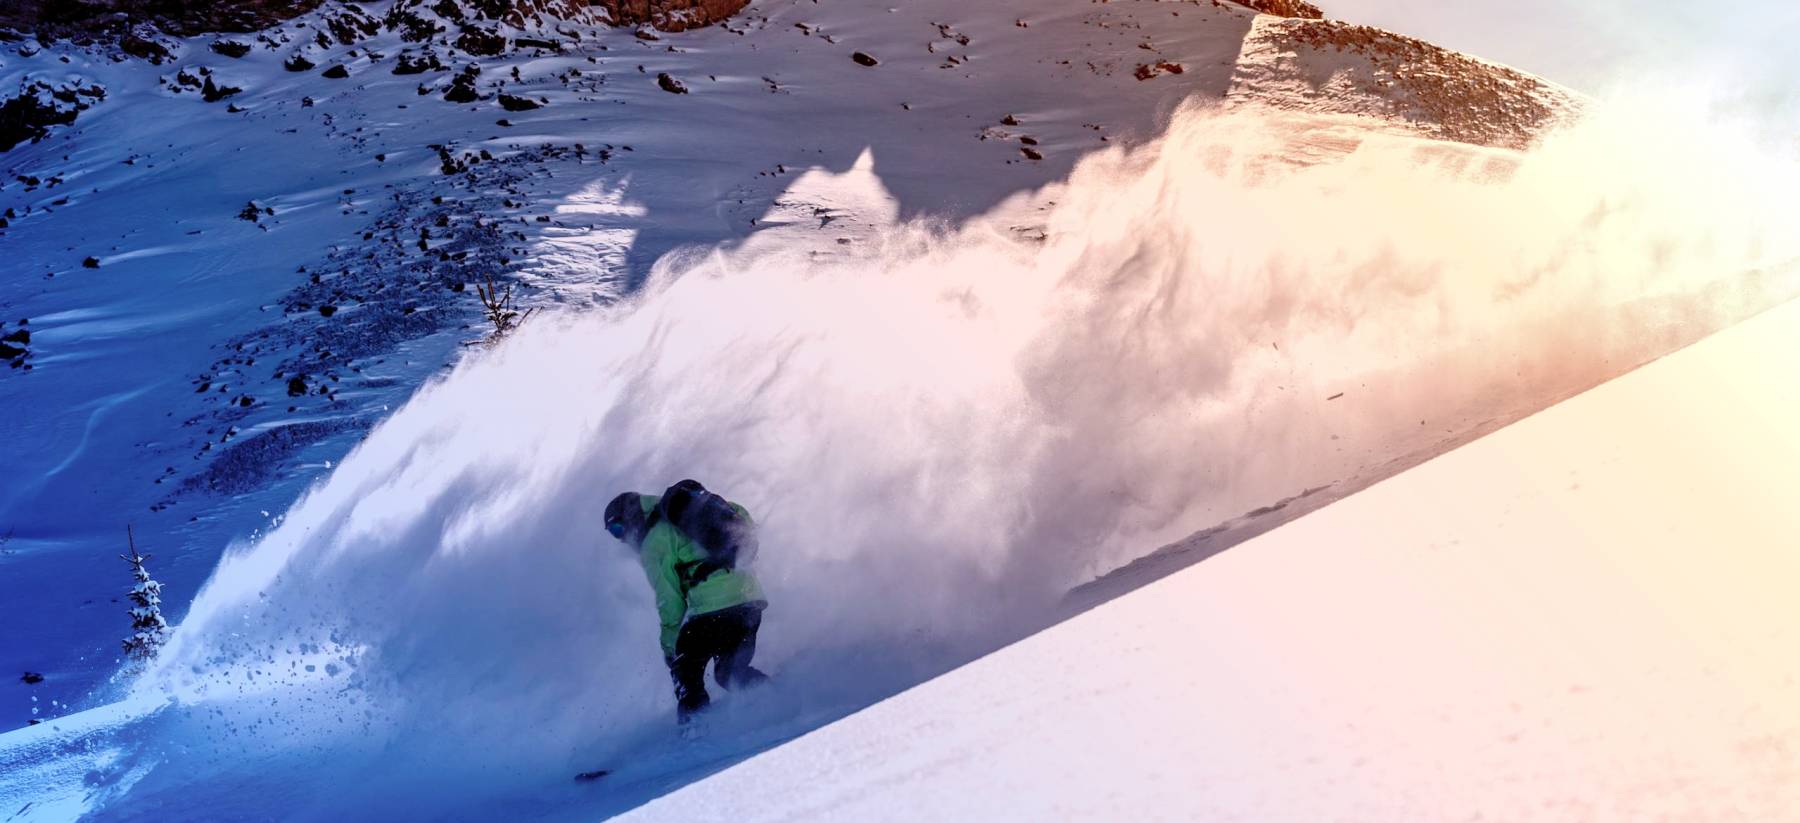 snowboarder kicking up big powder on a downhill run at Copper Mountain Resort during golden hour